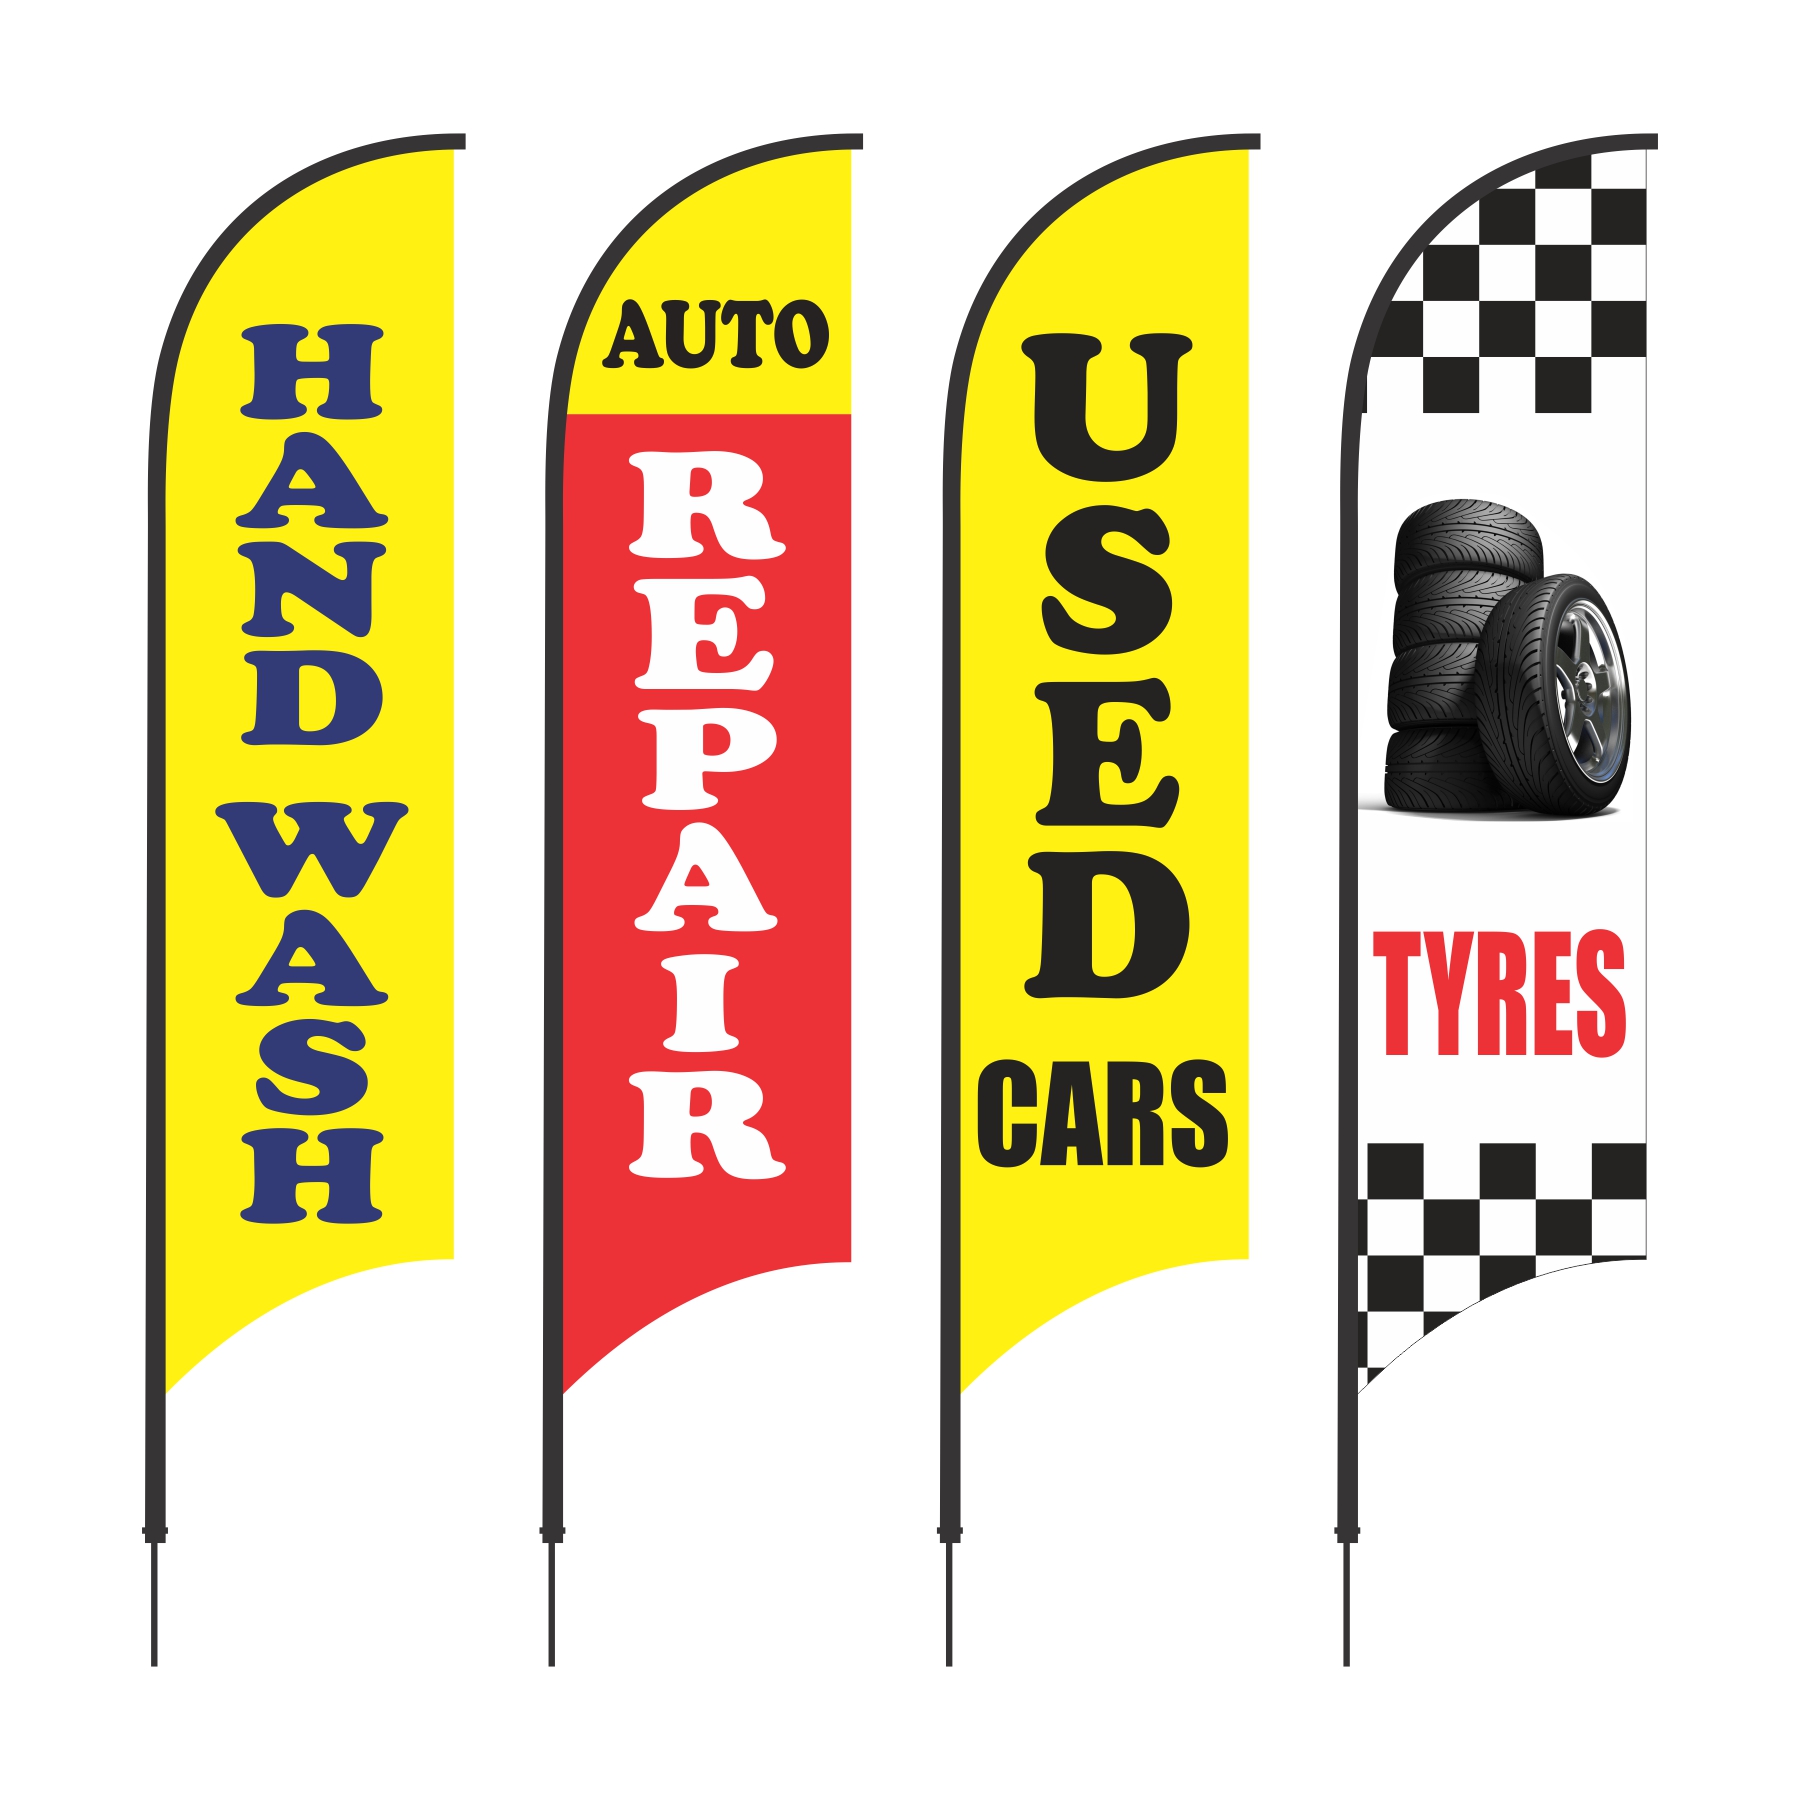 Auto and Car Wash flags